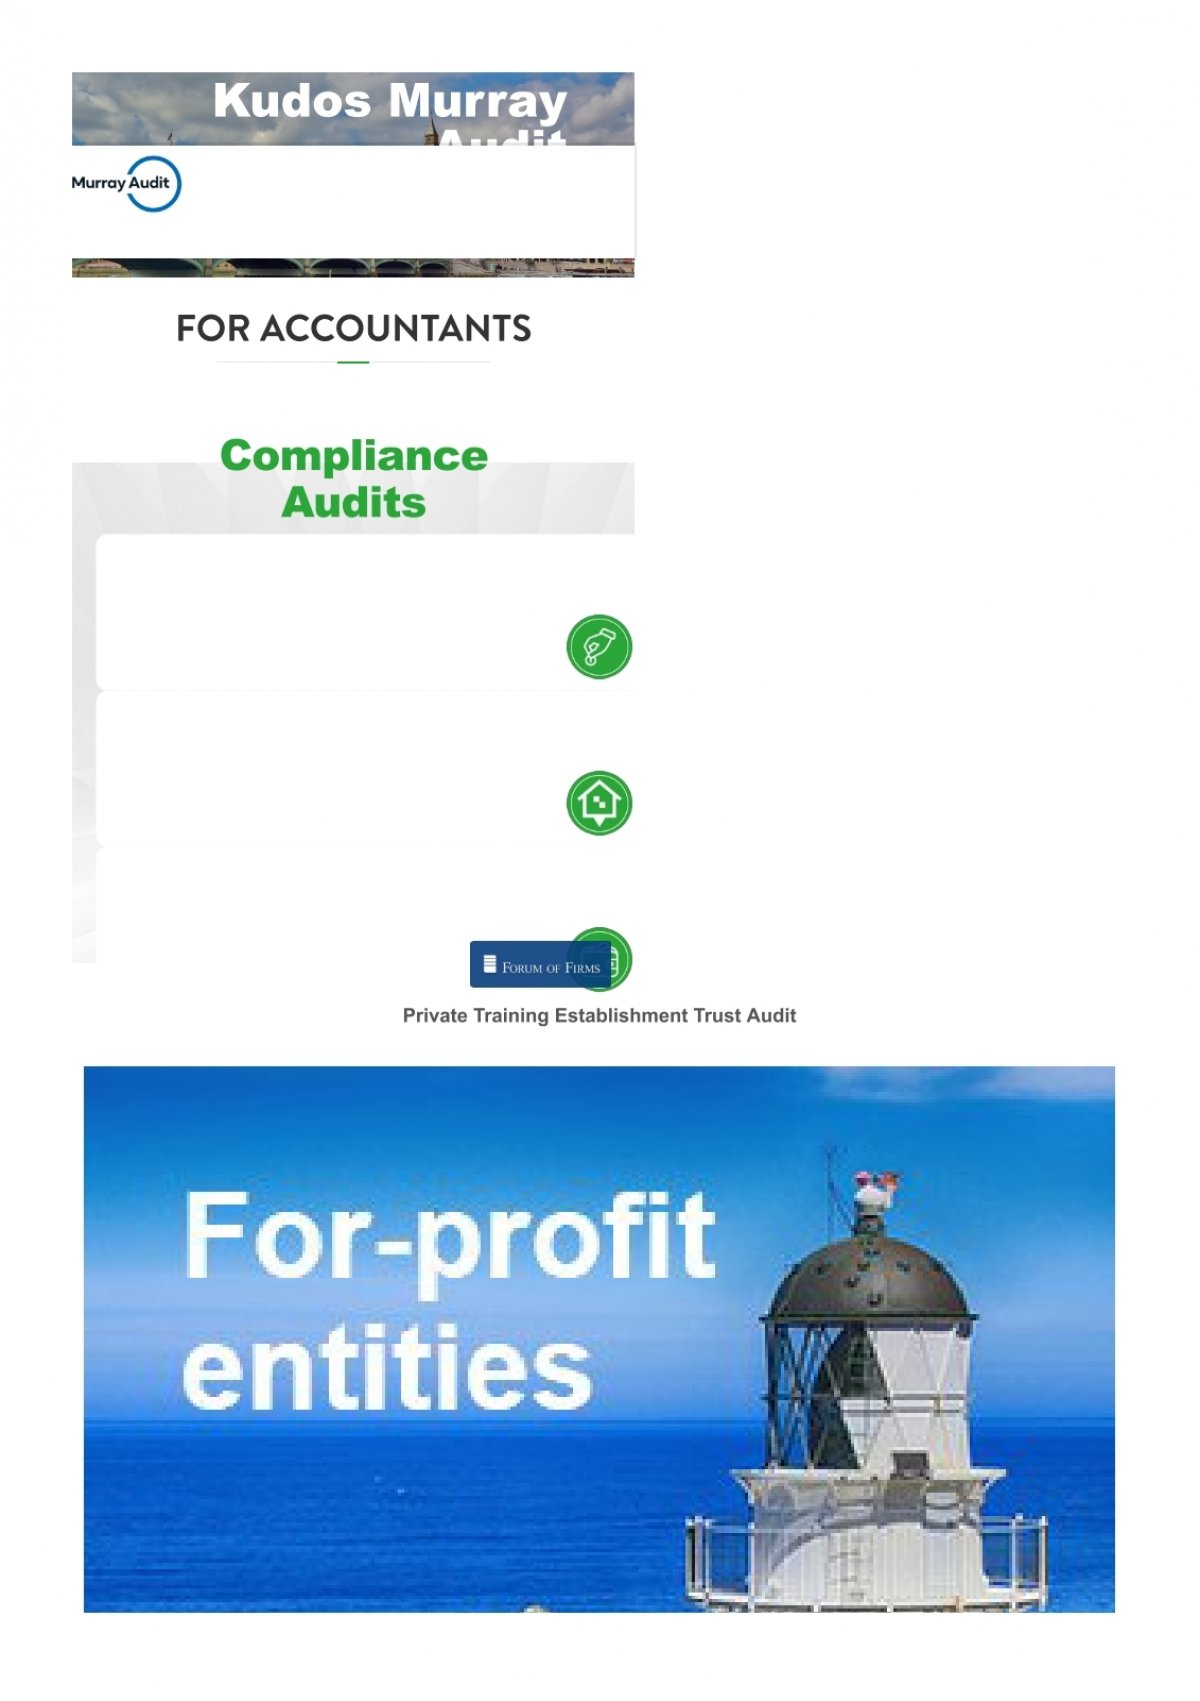 Best Chartered accountant & tier 2 accounting firms near me in Auckland, NZ